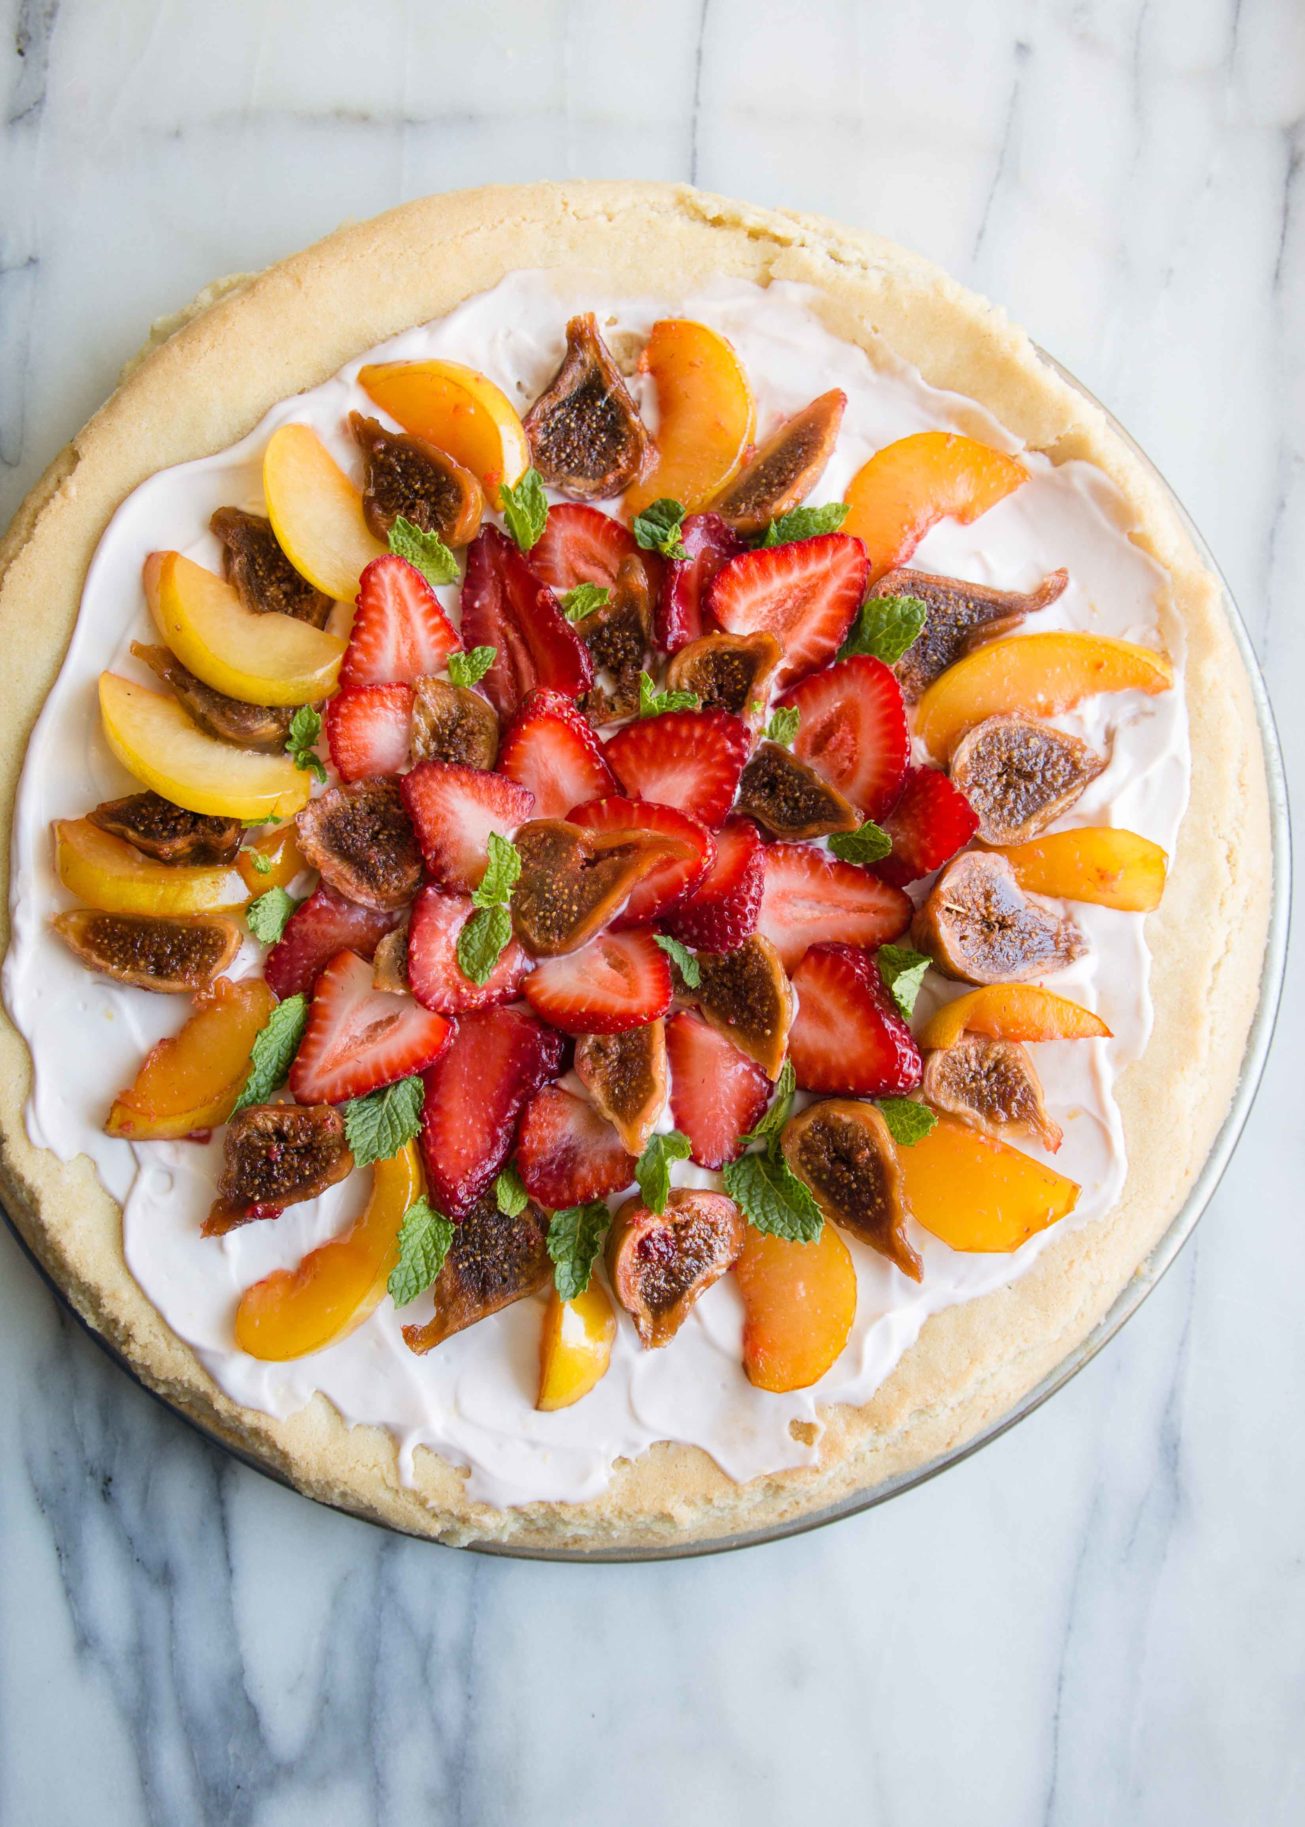 Fruit dessert lovers, make fruit pizza with sugar cookie dough. Top with stone fruits + dried figs for a fruit pizza recipe great in summer.